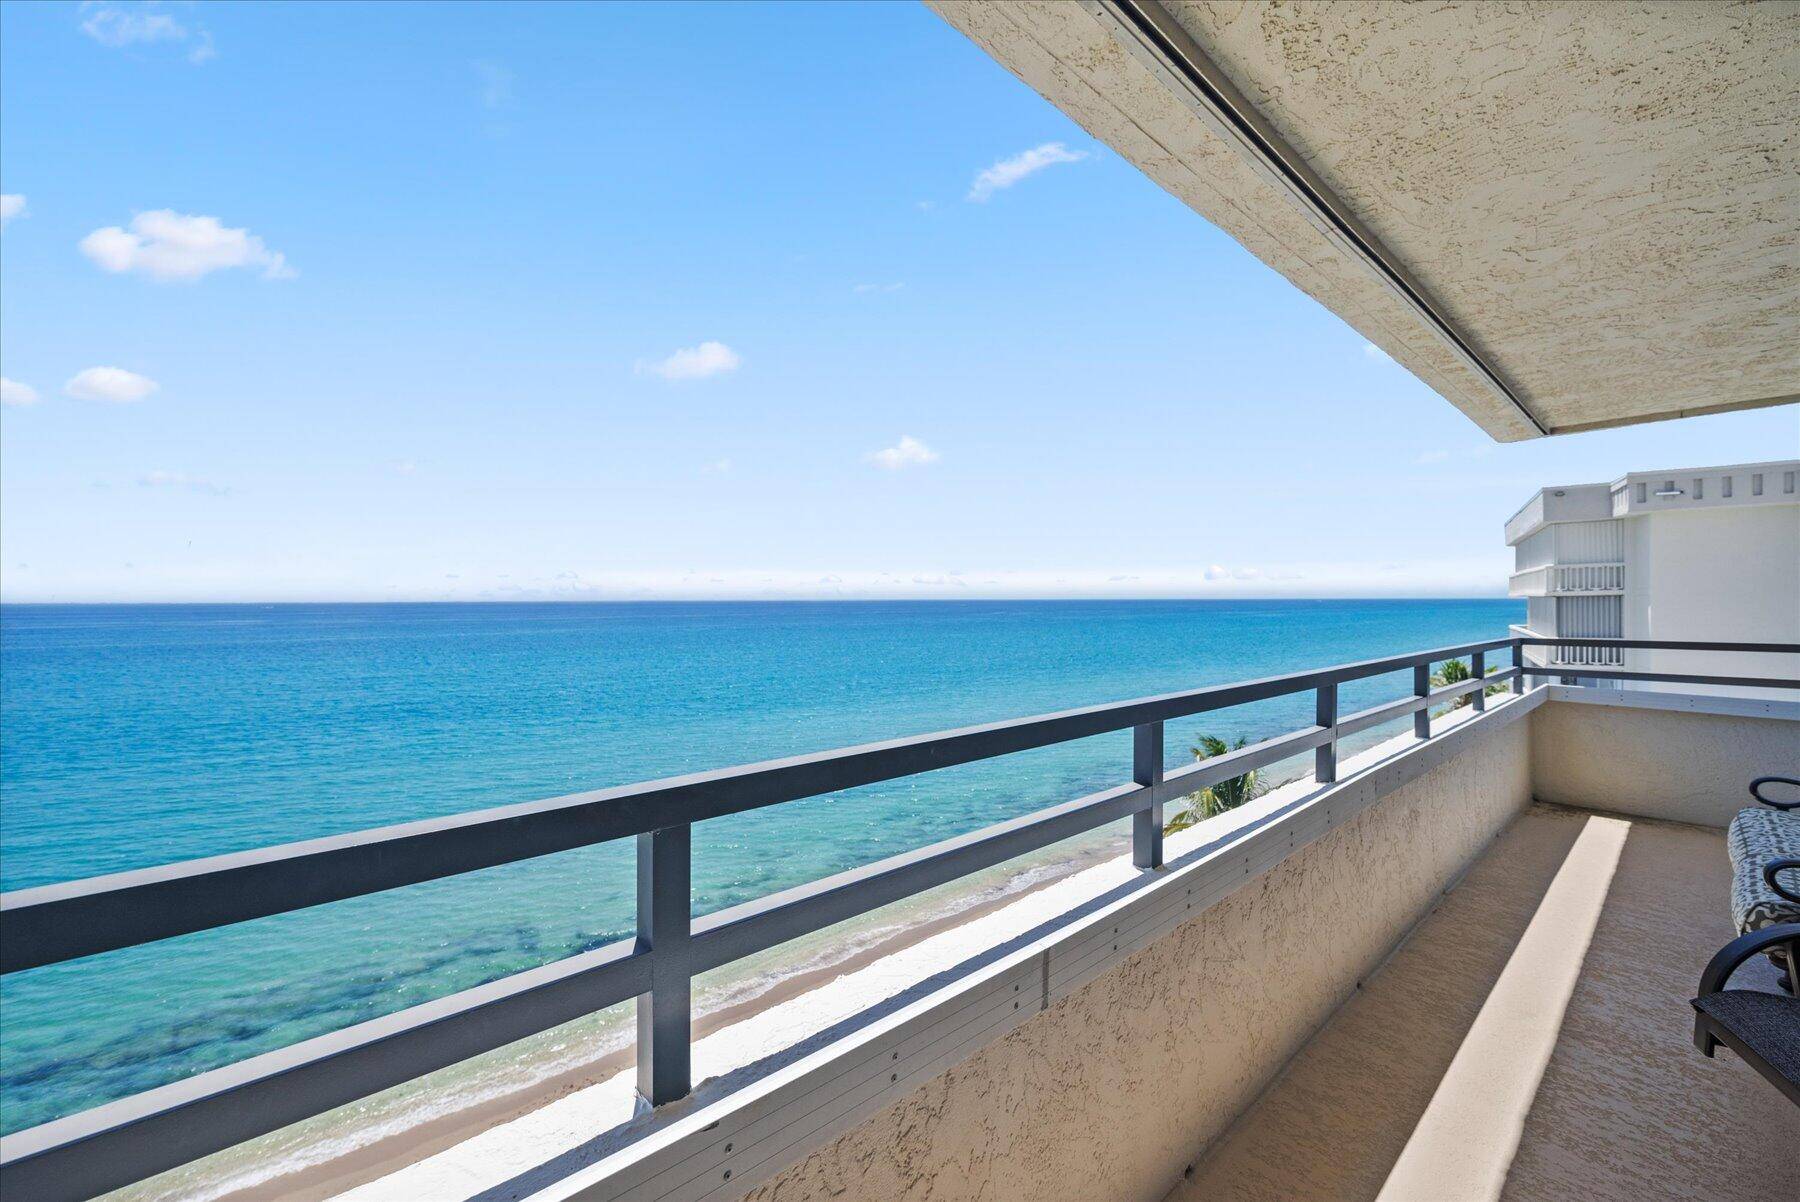 Direct Ocean Views from this 3 Bedroom 2 and a half bath condo with over 2400 SF including a wrap around balcony for expansive SE ocean views from the moment ...